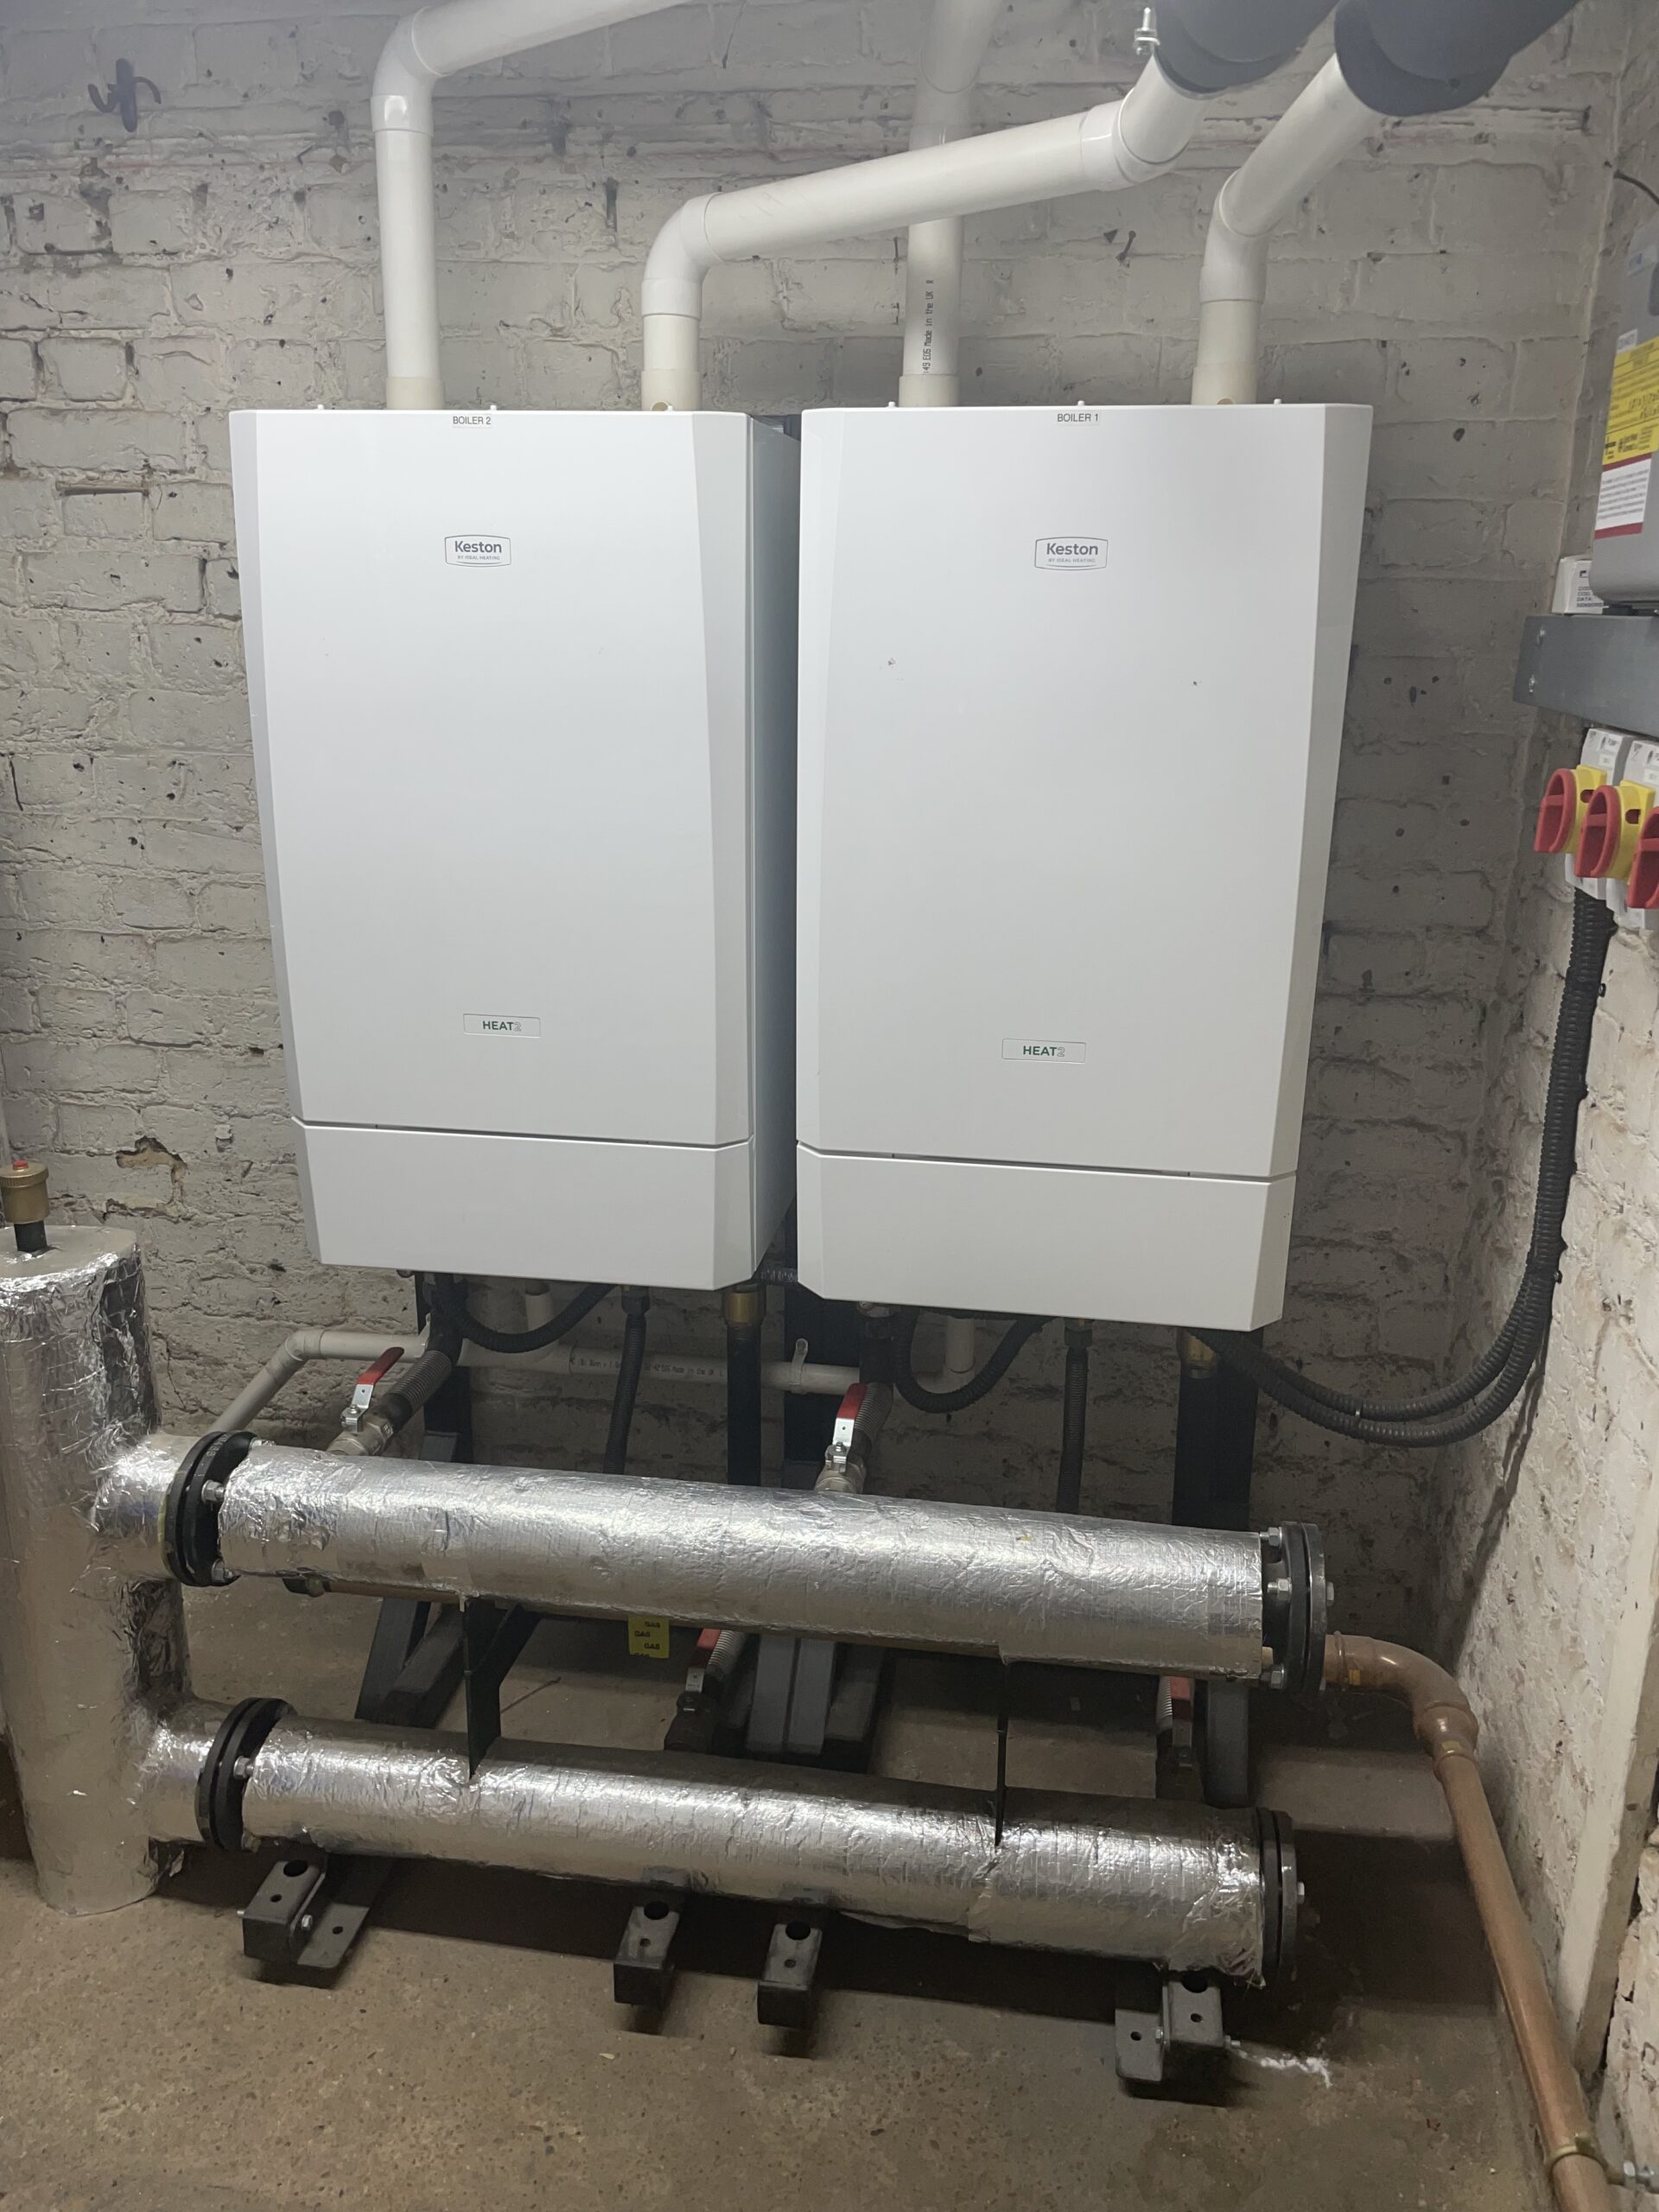 Case Study: Efficient Heating Solution for School with Keston Heat 2 55 Boilers